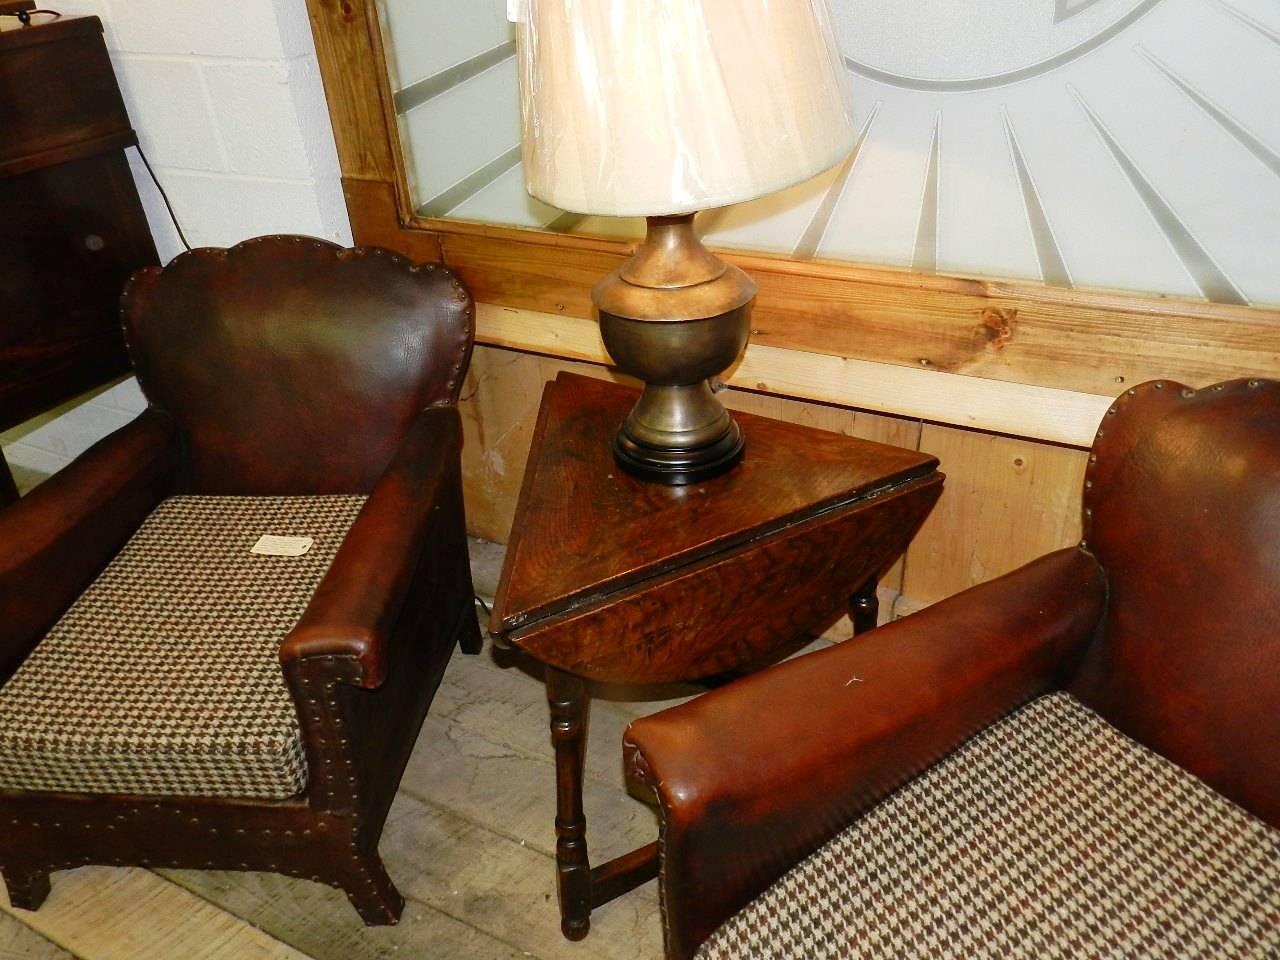 An antique English oak drop-leaf tavern side table. The three turned legs are united by a stretcher base. There are three drop leaves making a unique and highly characterful piece.